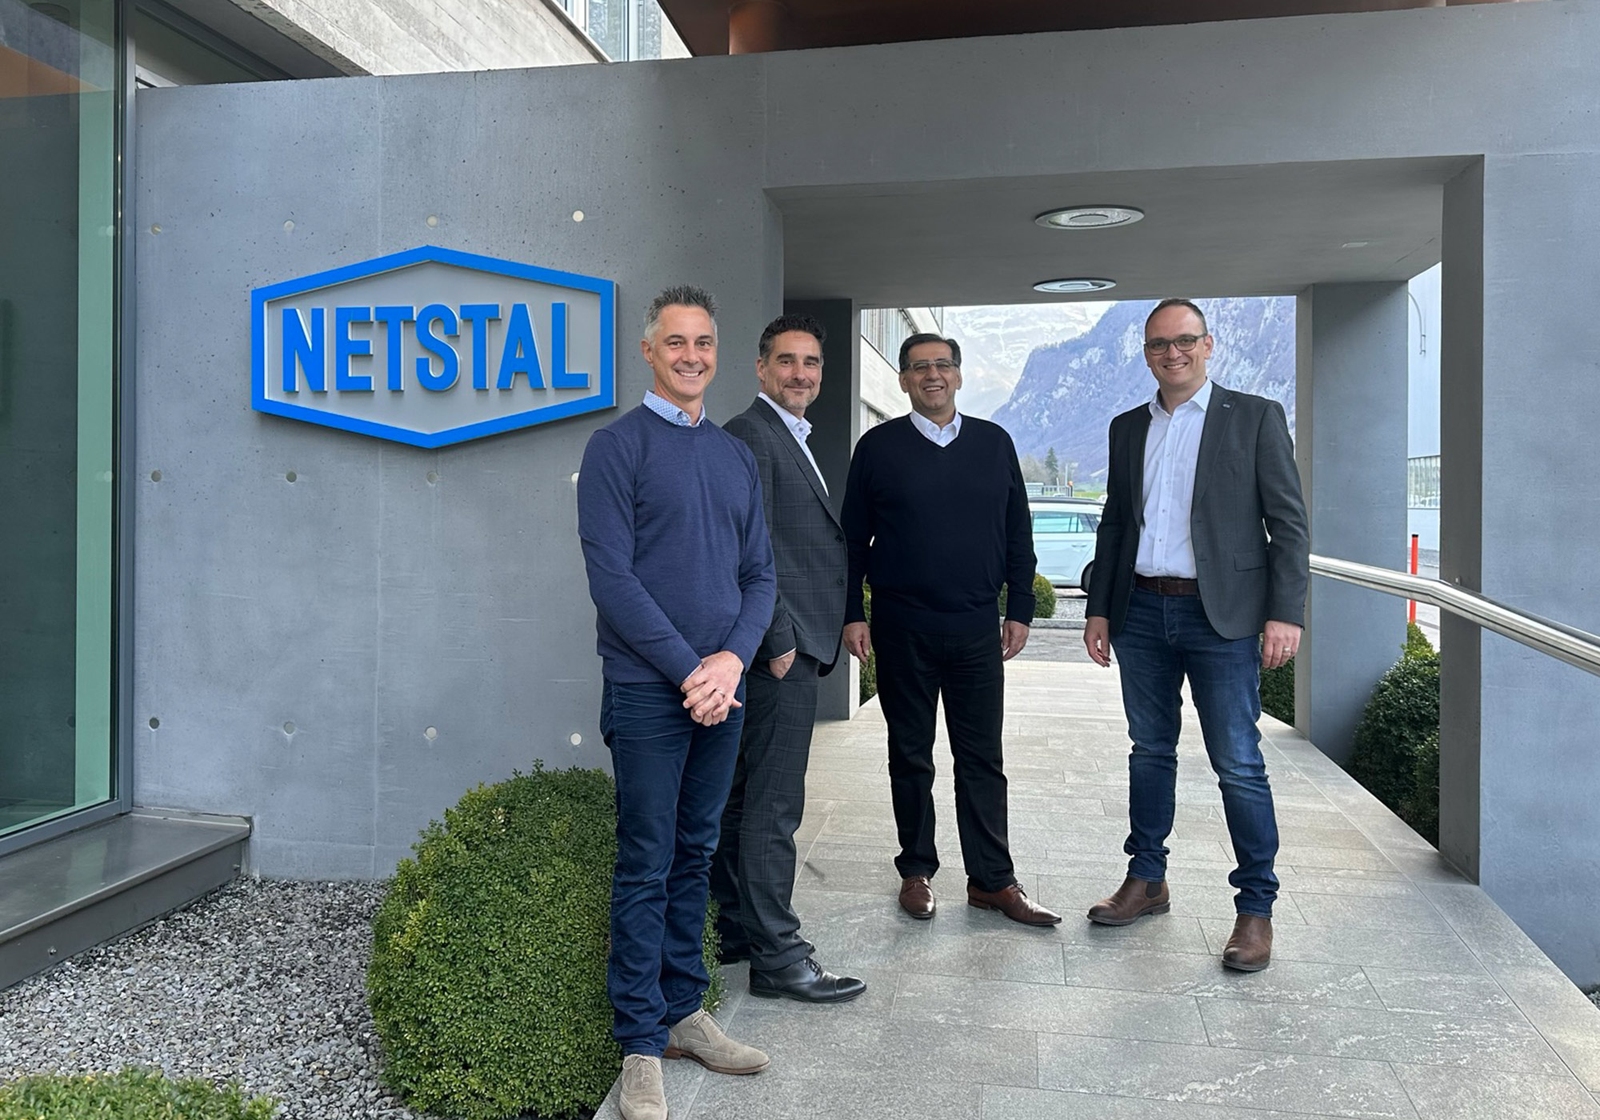 Announcing our new partner for injection moulding machinery: NETSTAL